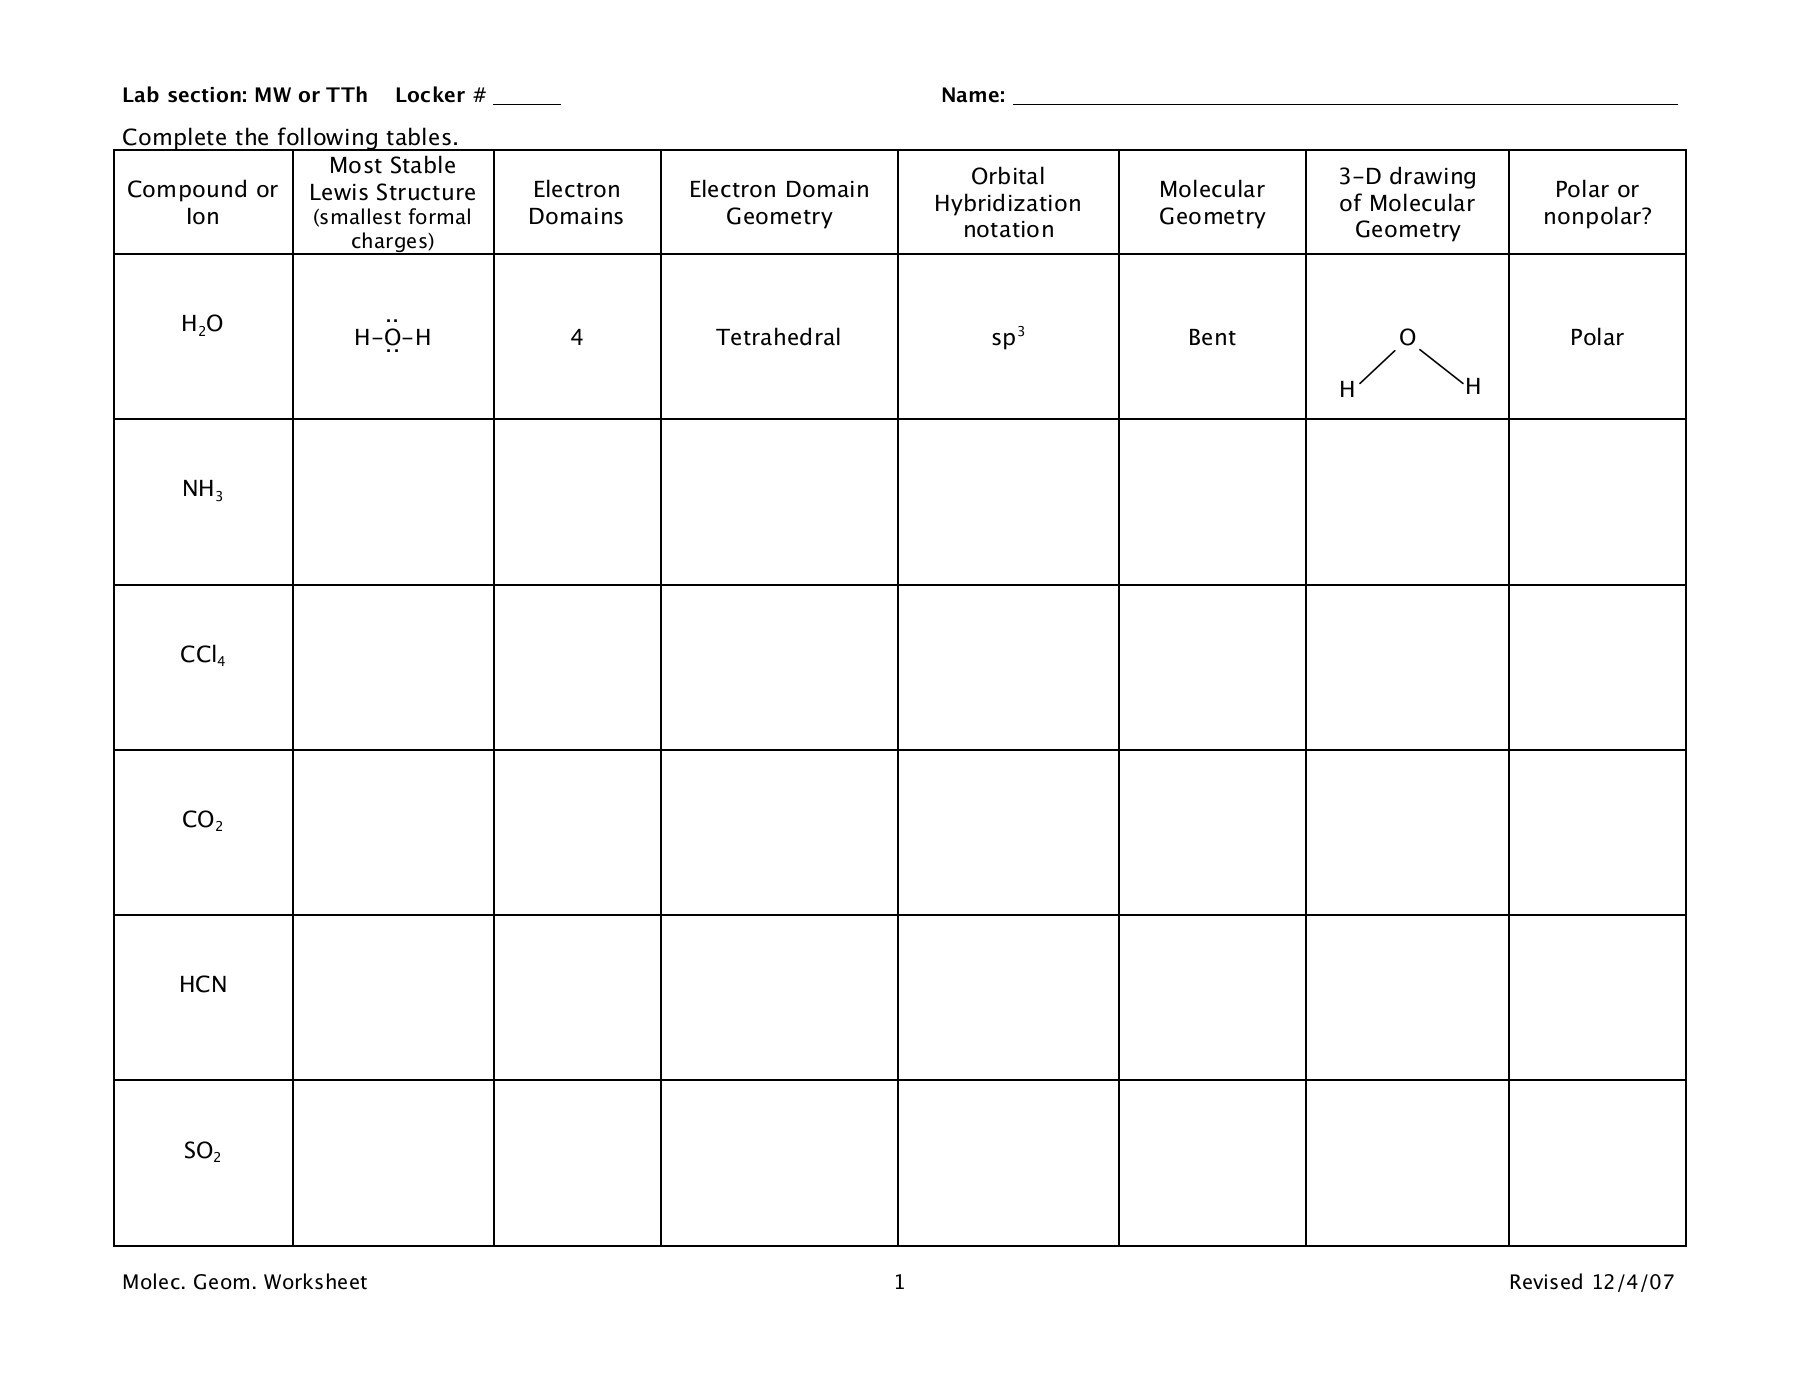 Chemistry 1A Molecular Geometries Worksheet Pages 1  7  Text With Regard To Lewis Structure And Molecular Geometry Worksheet